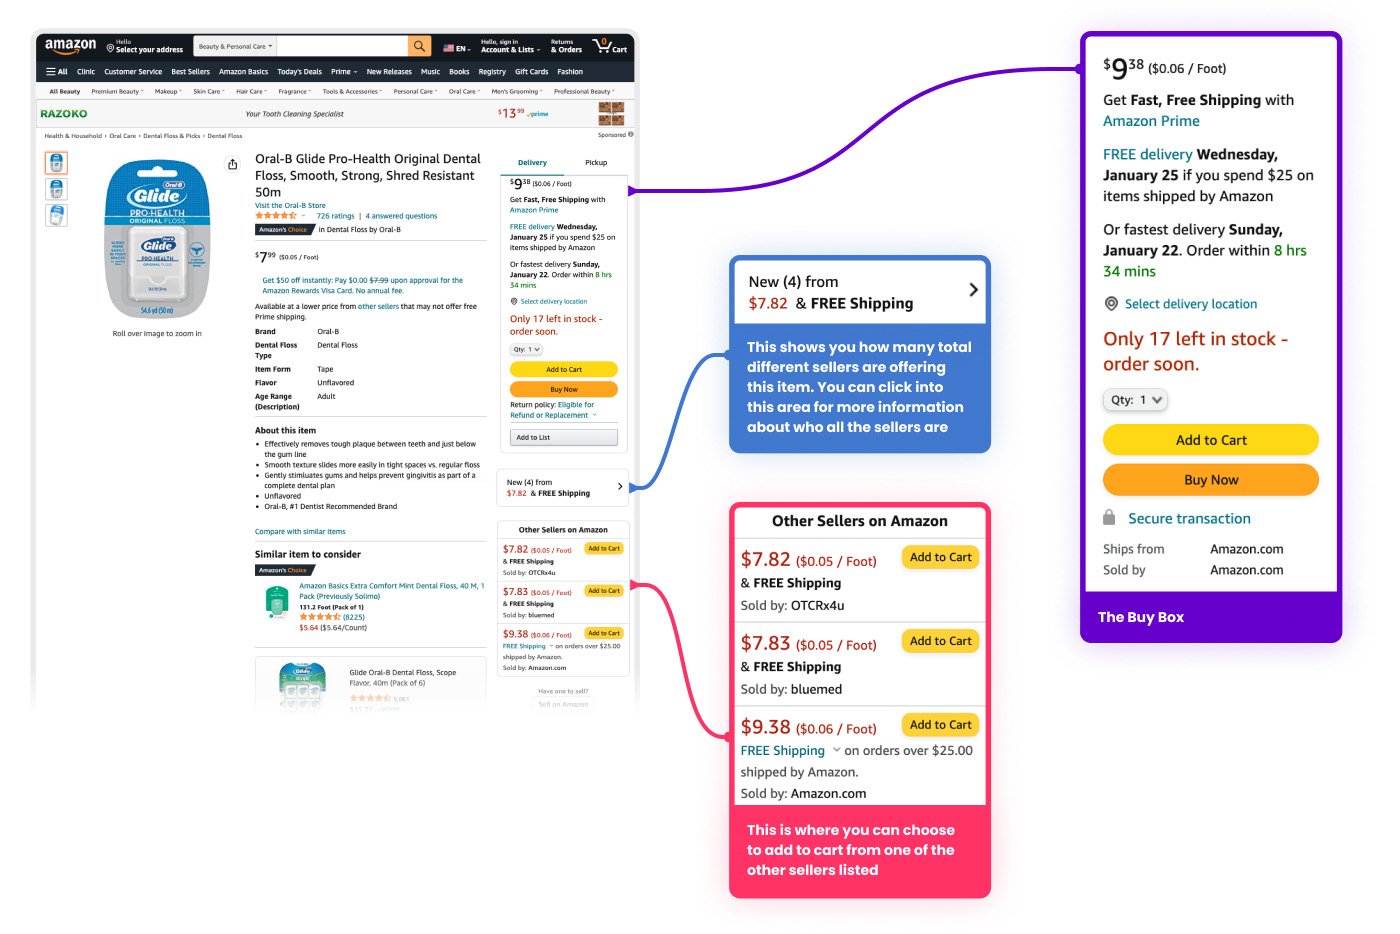 Amazon Buy Box infographic also showing where other sellers can be chosen by shoppers